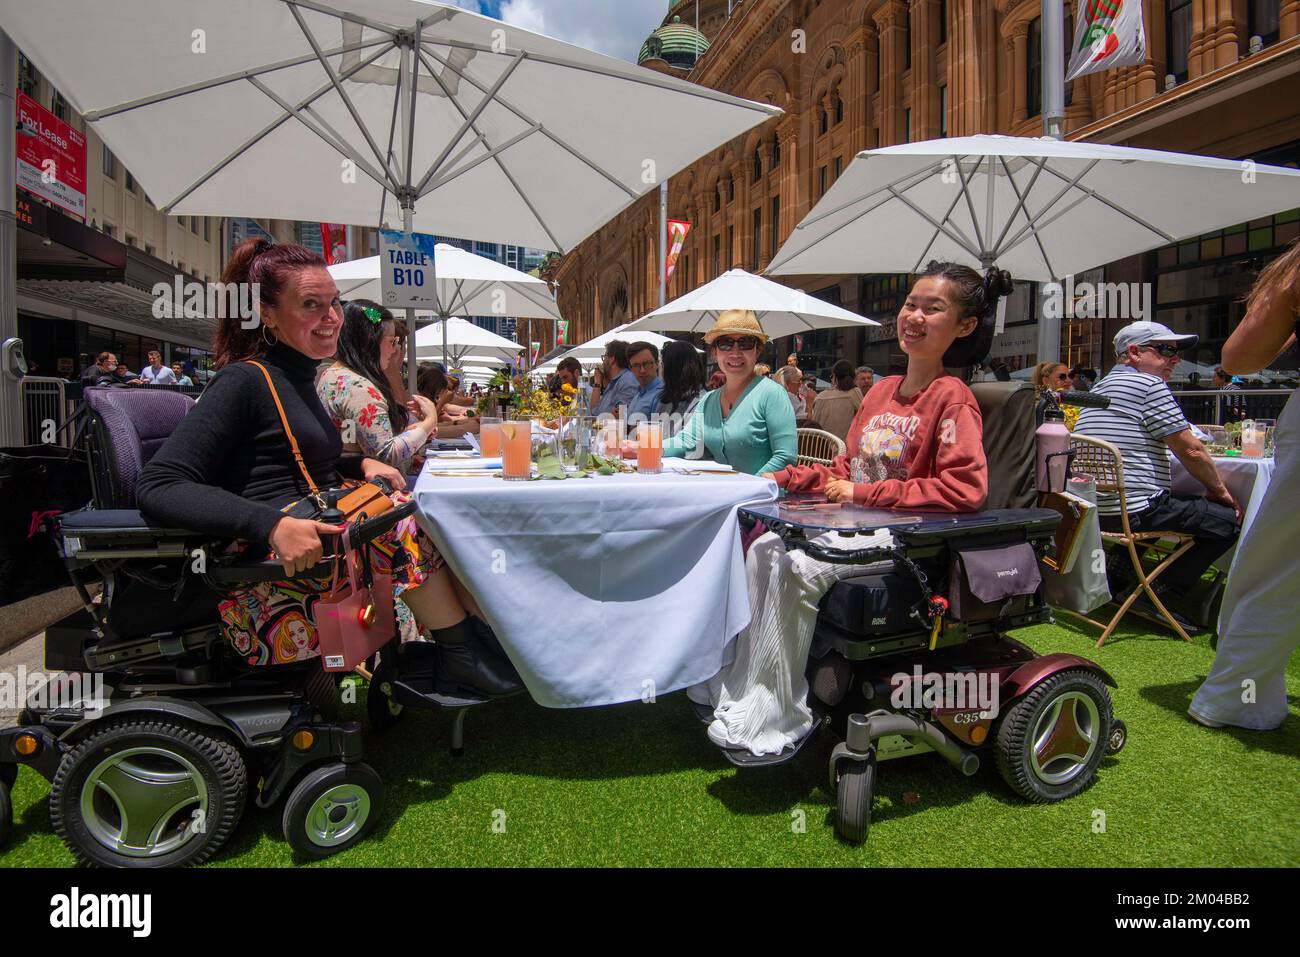 Two women in motorised wheelchairs smile and enjoy the day at Sydney’s 2022 Open For Lunch in Australia event held in George Street Stock Photo